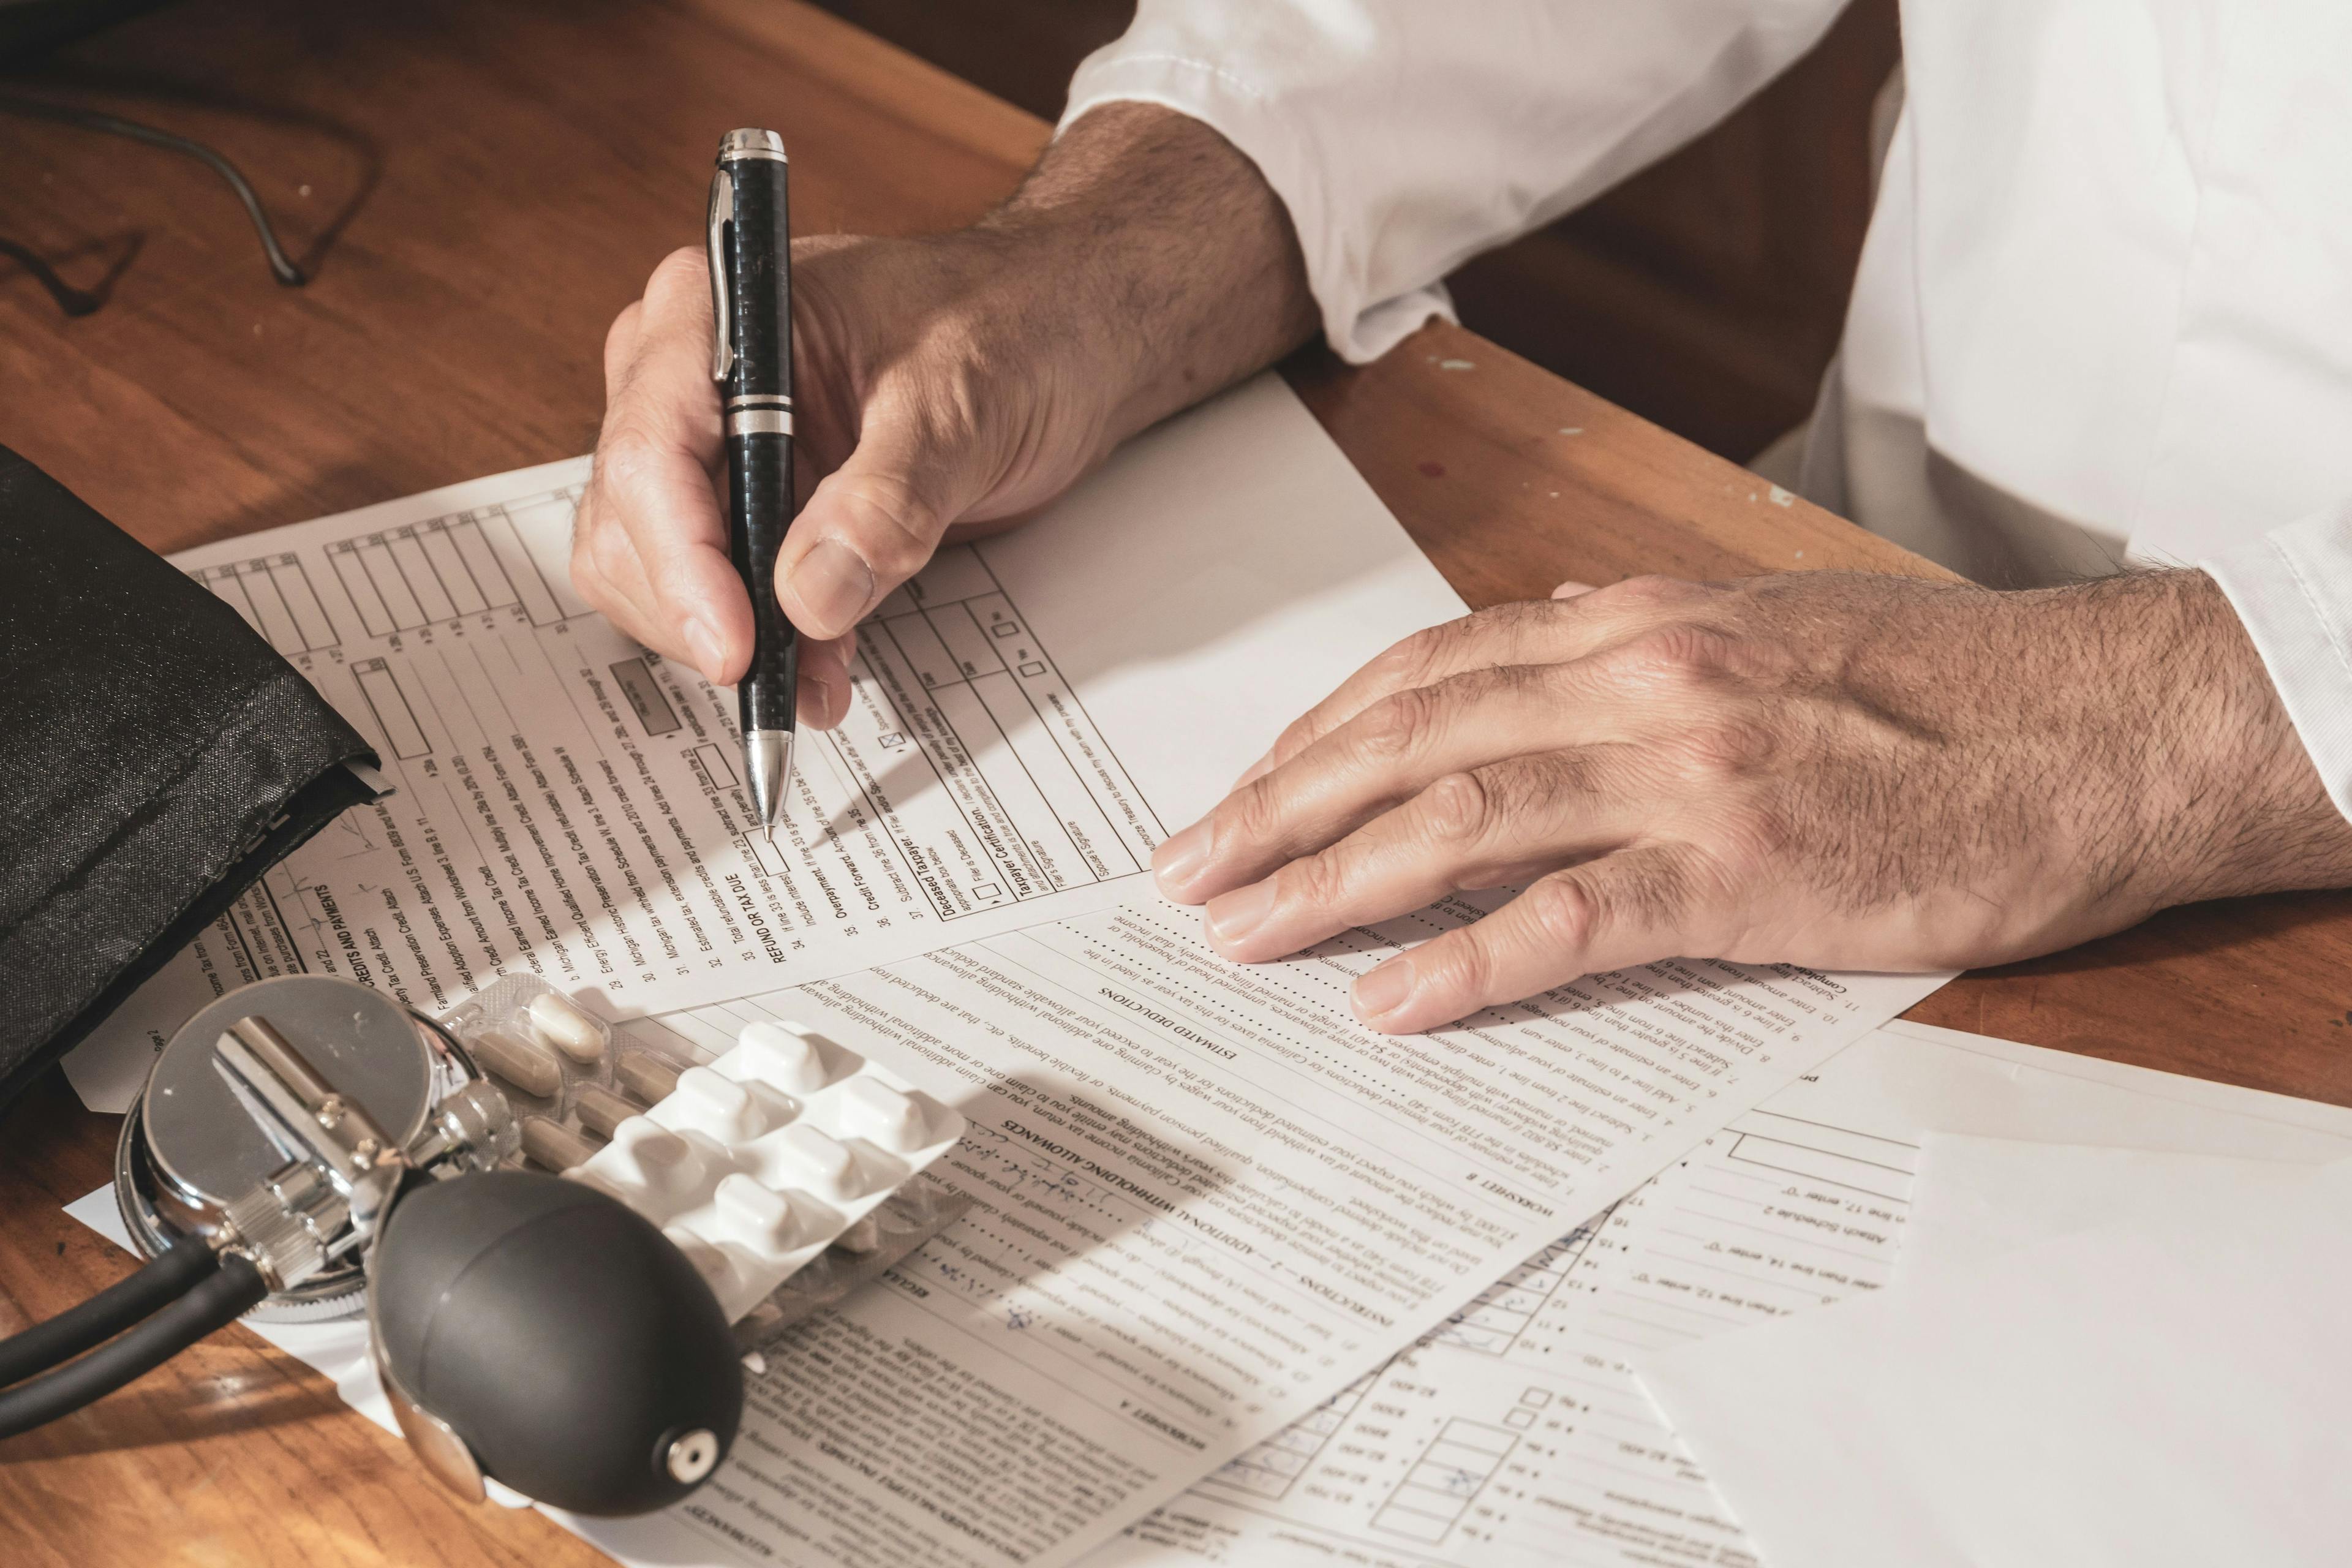 Treatment Delays Associated with Prior Authorization